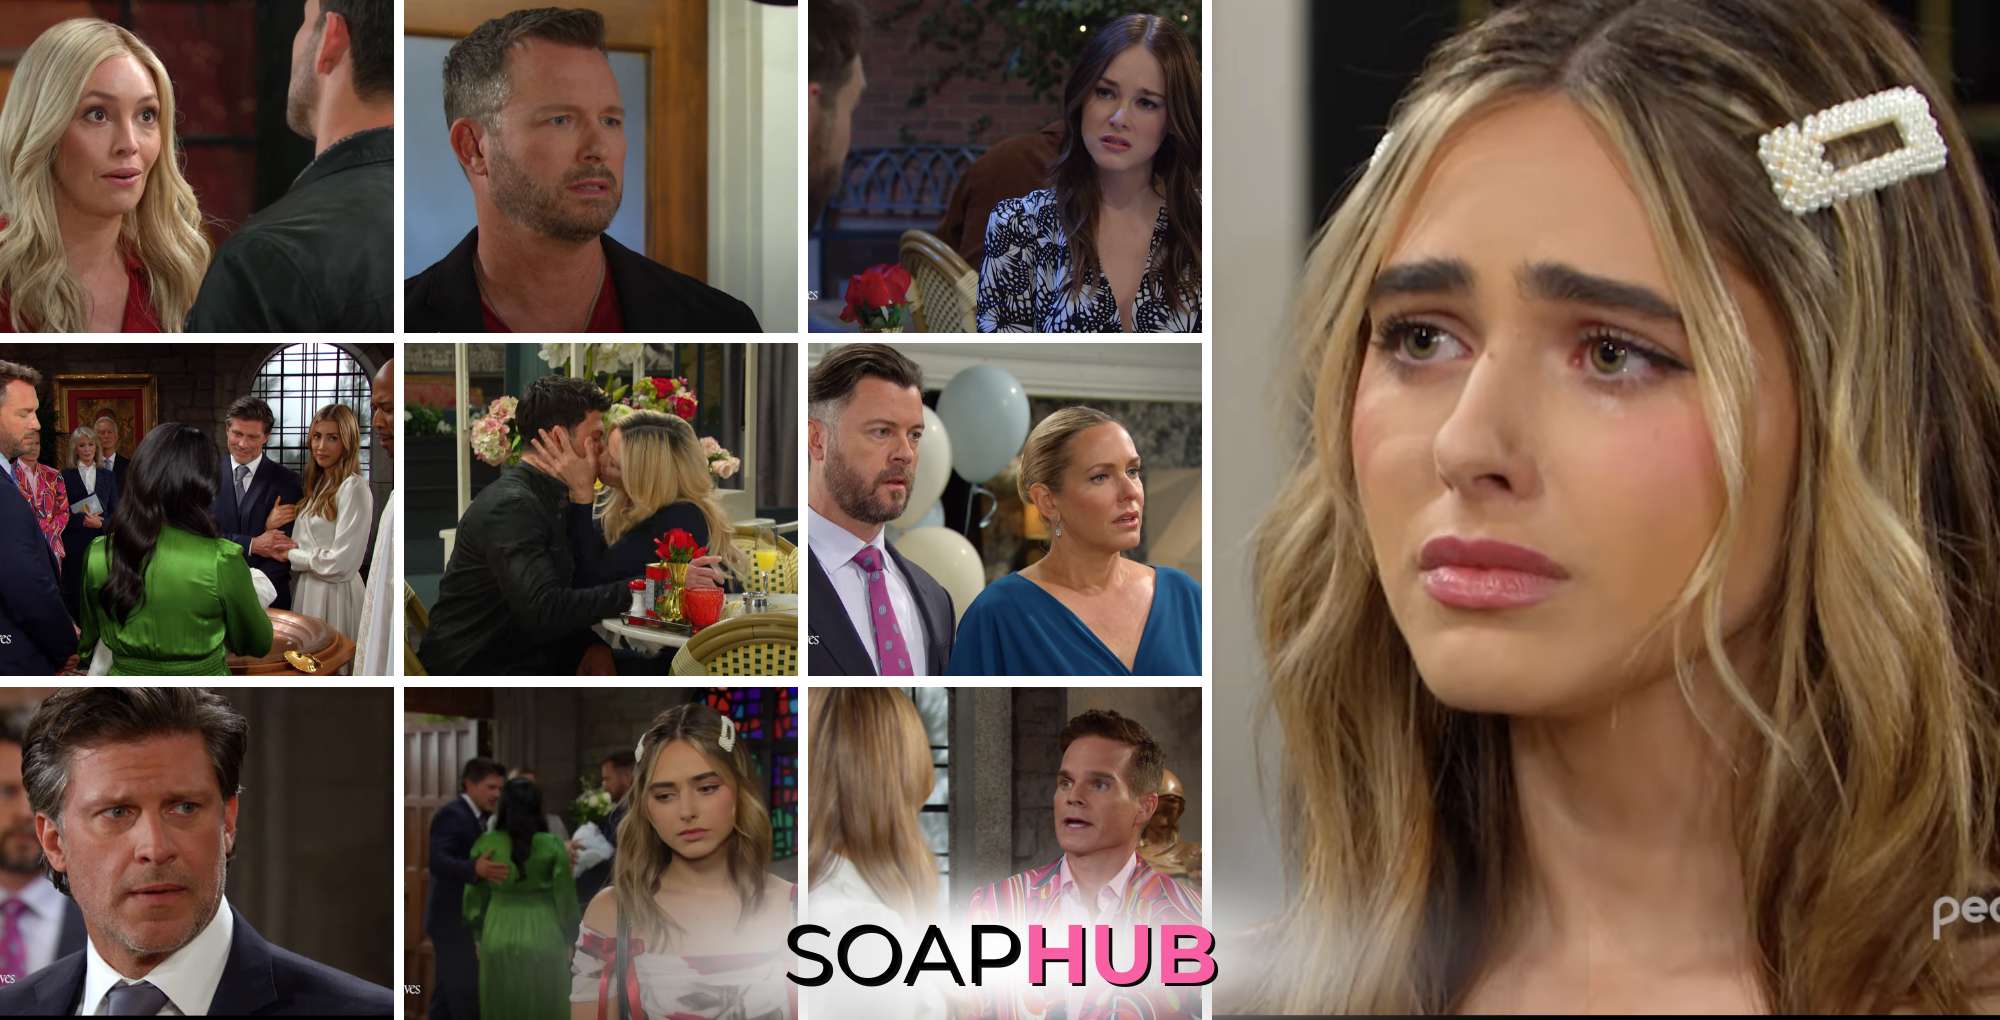 Days of our Lives spoilers promo video collage for the week of March 25 with the Soap Hub logo across the bottom.